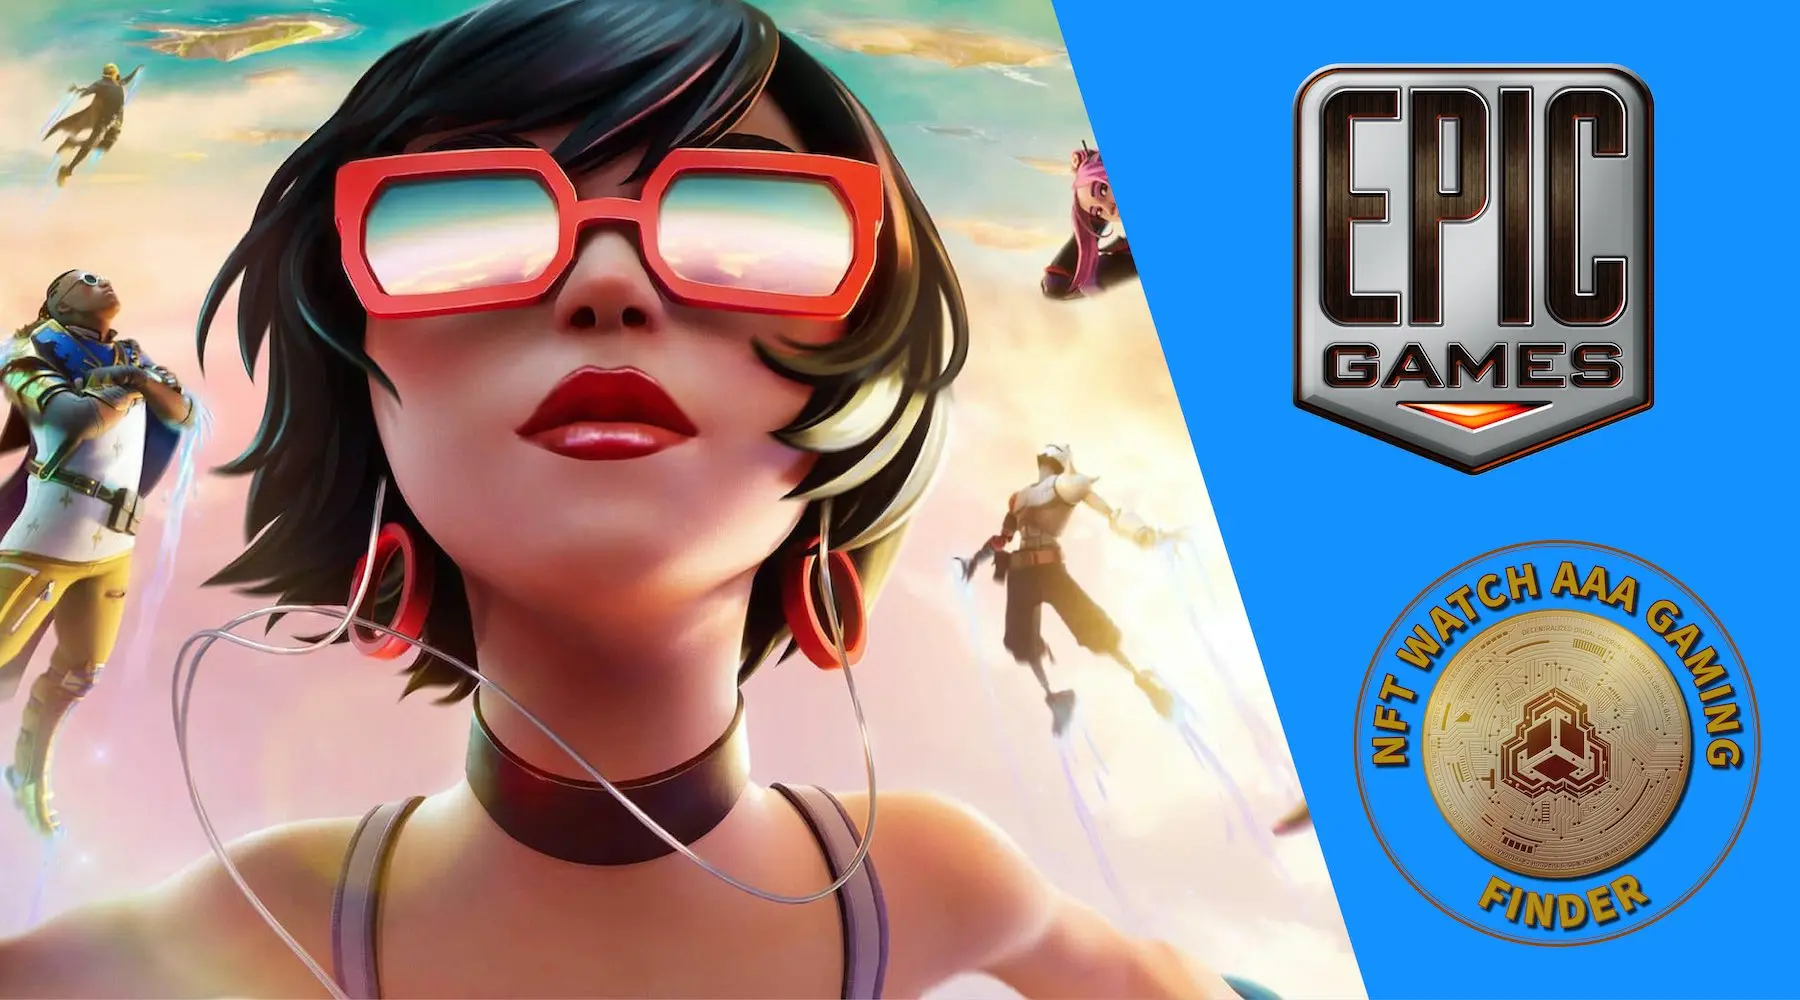 Epic Games adds 20 NFT Titles to Level up its Roster - NFT Plazas